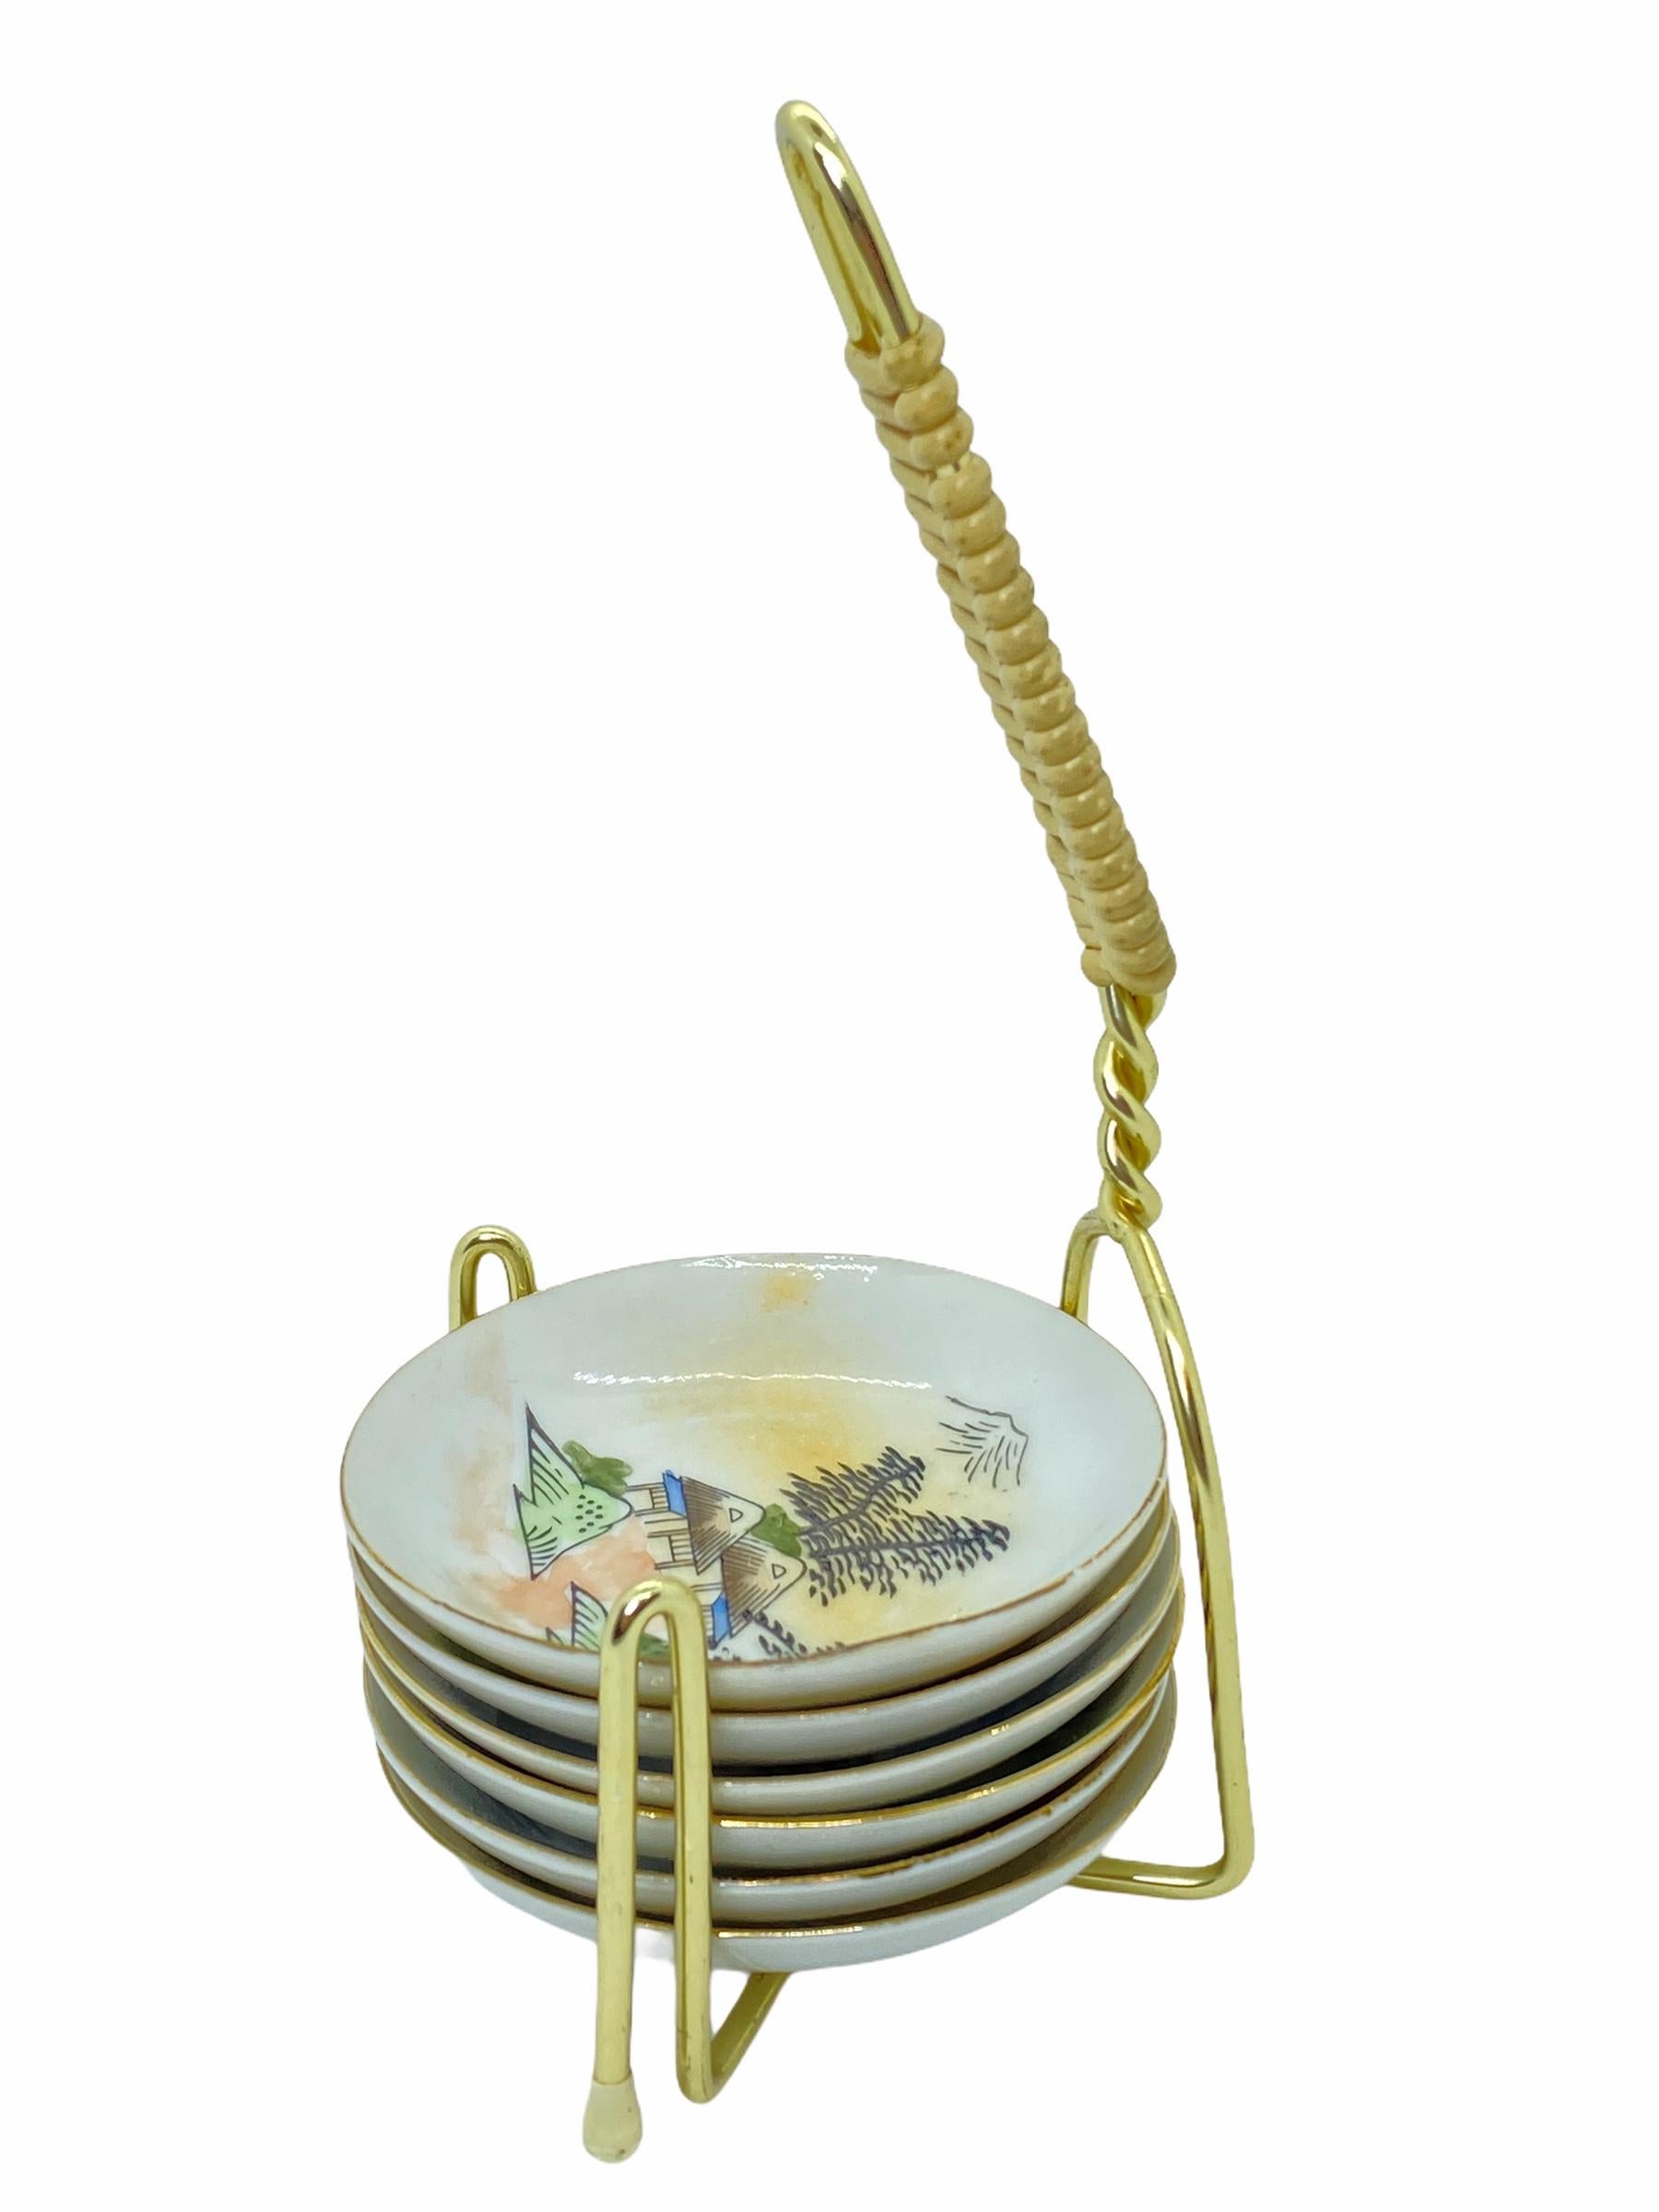 This lovely piece is typical, 1950s. Six little plates in Japanese or Chinese design for nuts or finger food and a golden metal stand. The little plates are approximate 3 3/8